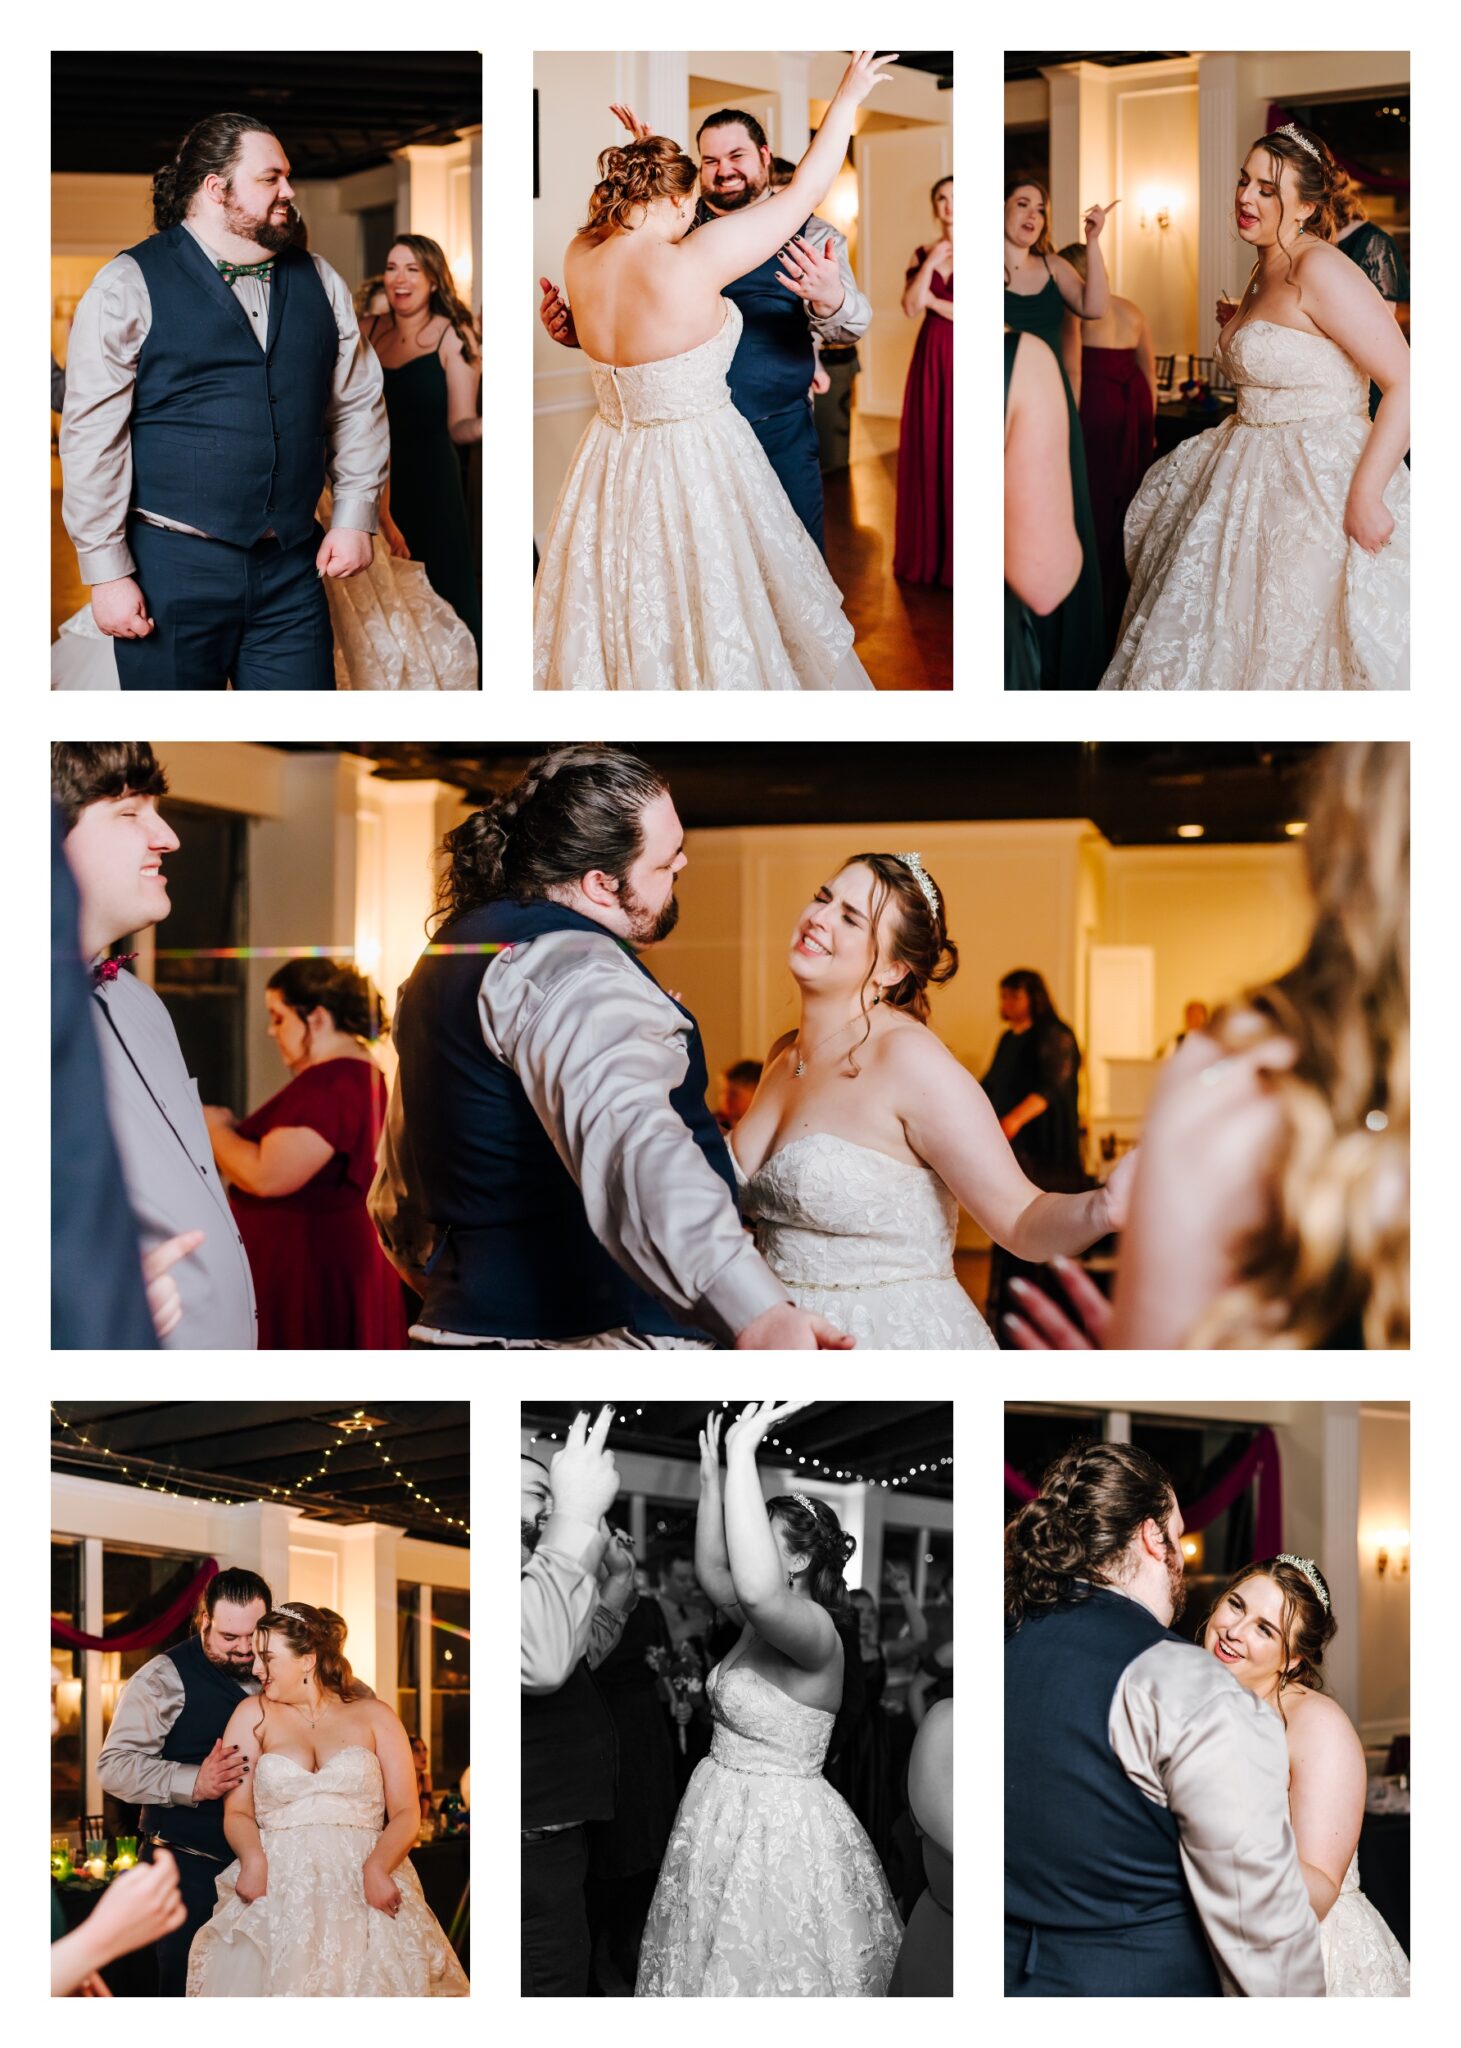 A collage of the newlyweds dancing at their reception